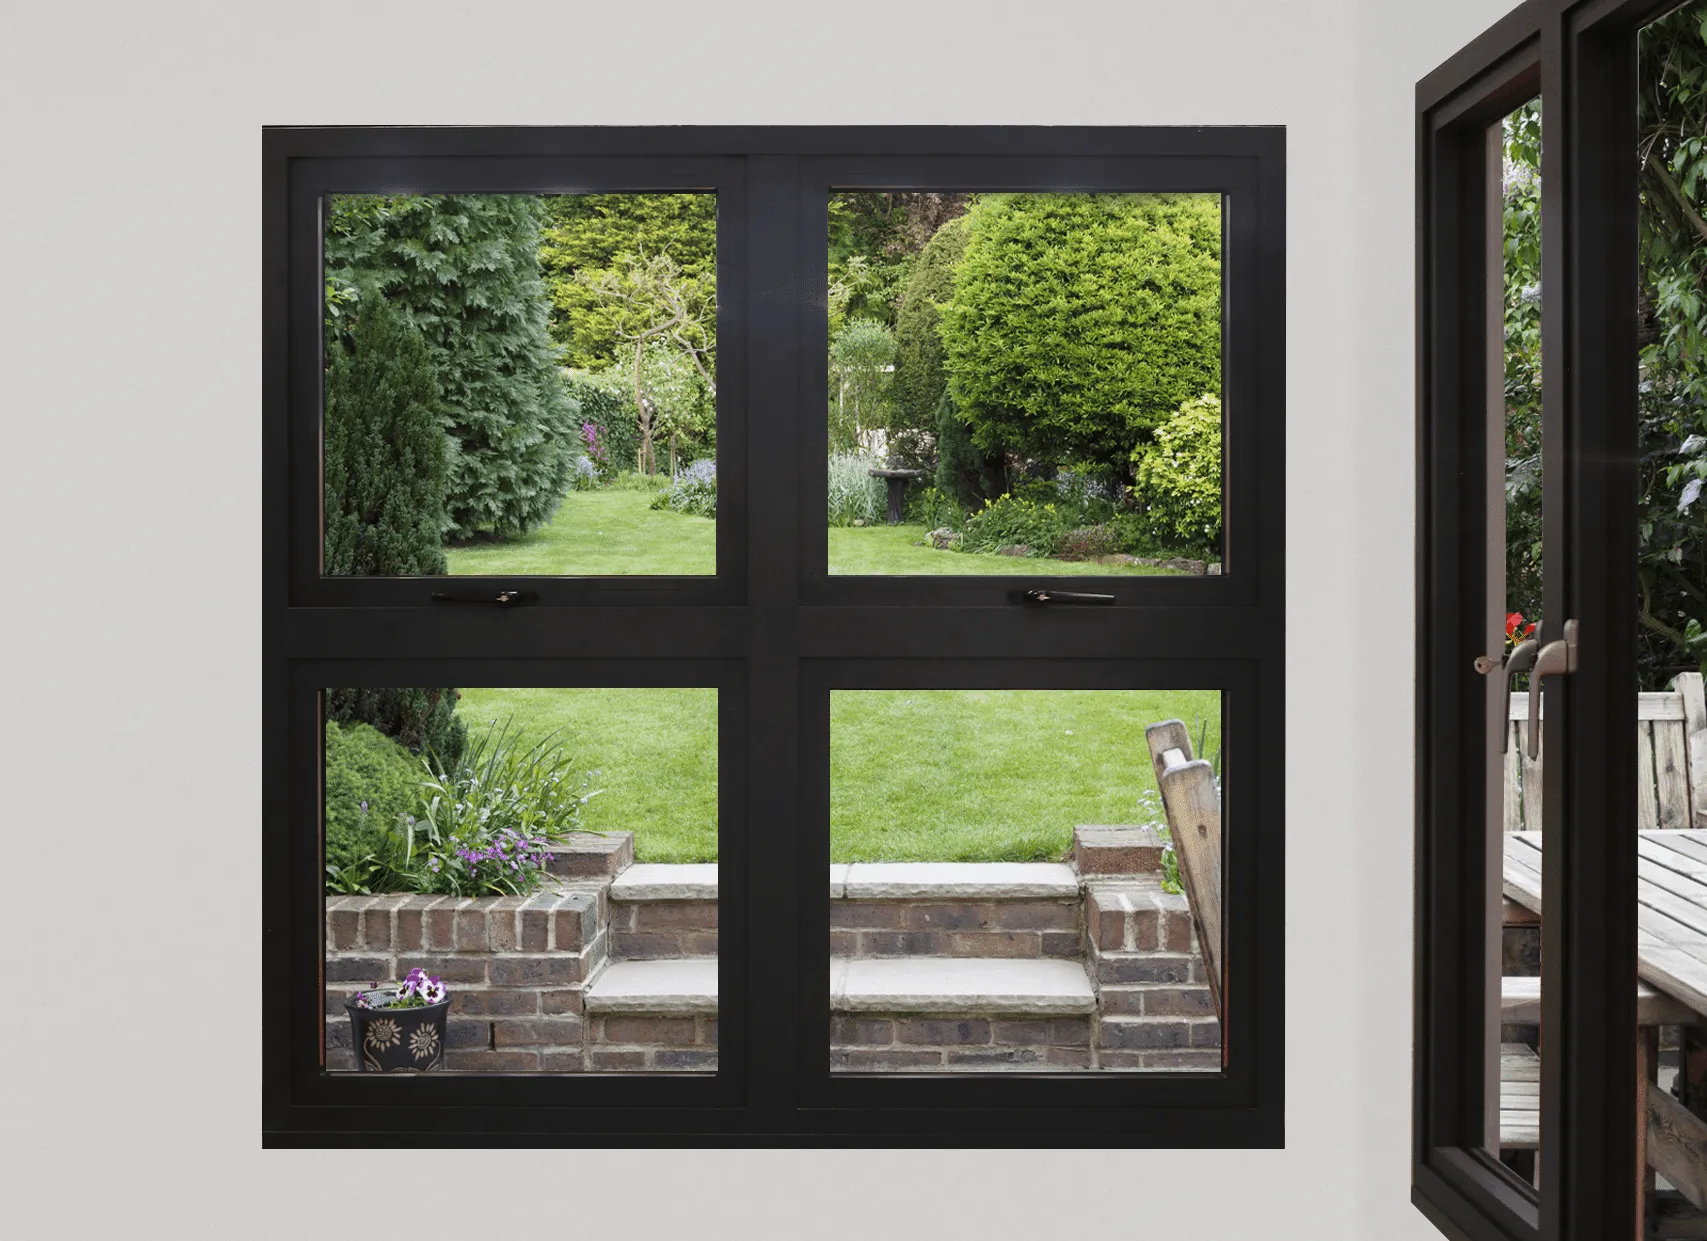 The Ultimate Guide to Buying Windows: Aesthetics, Energy Efficiency and Security